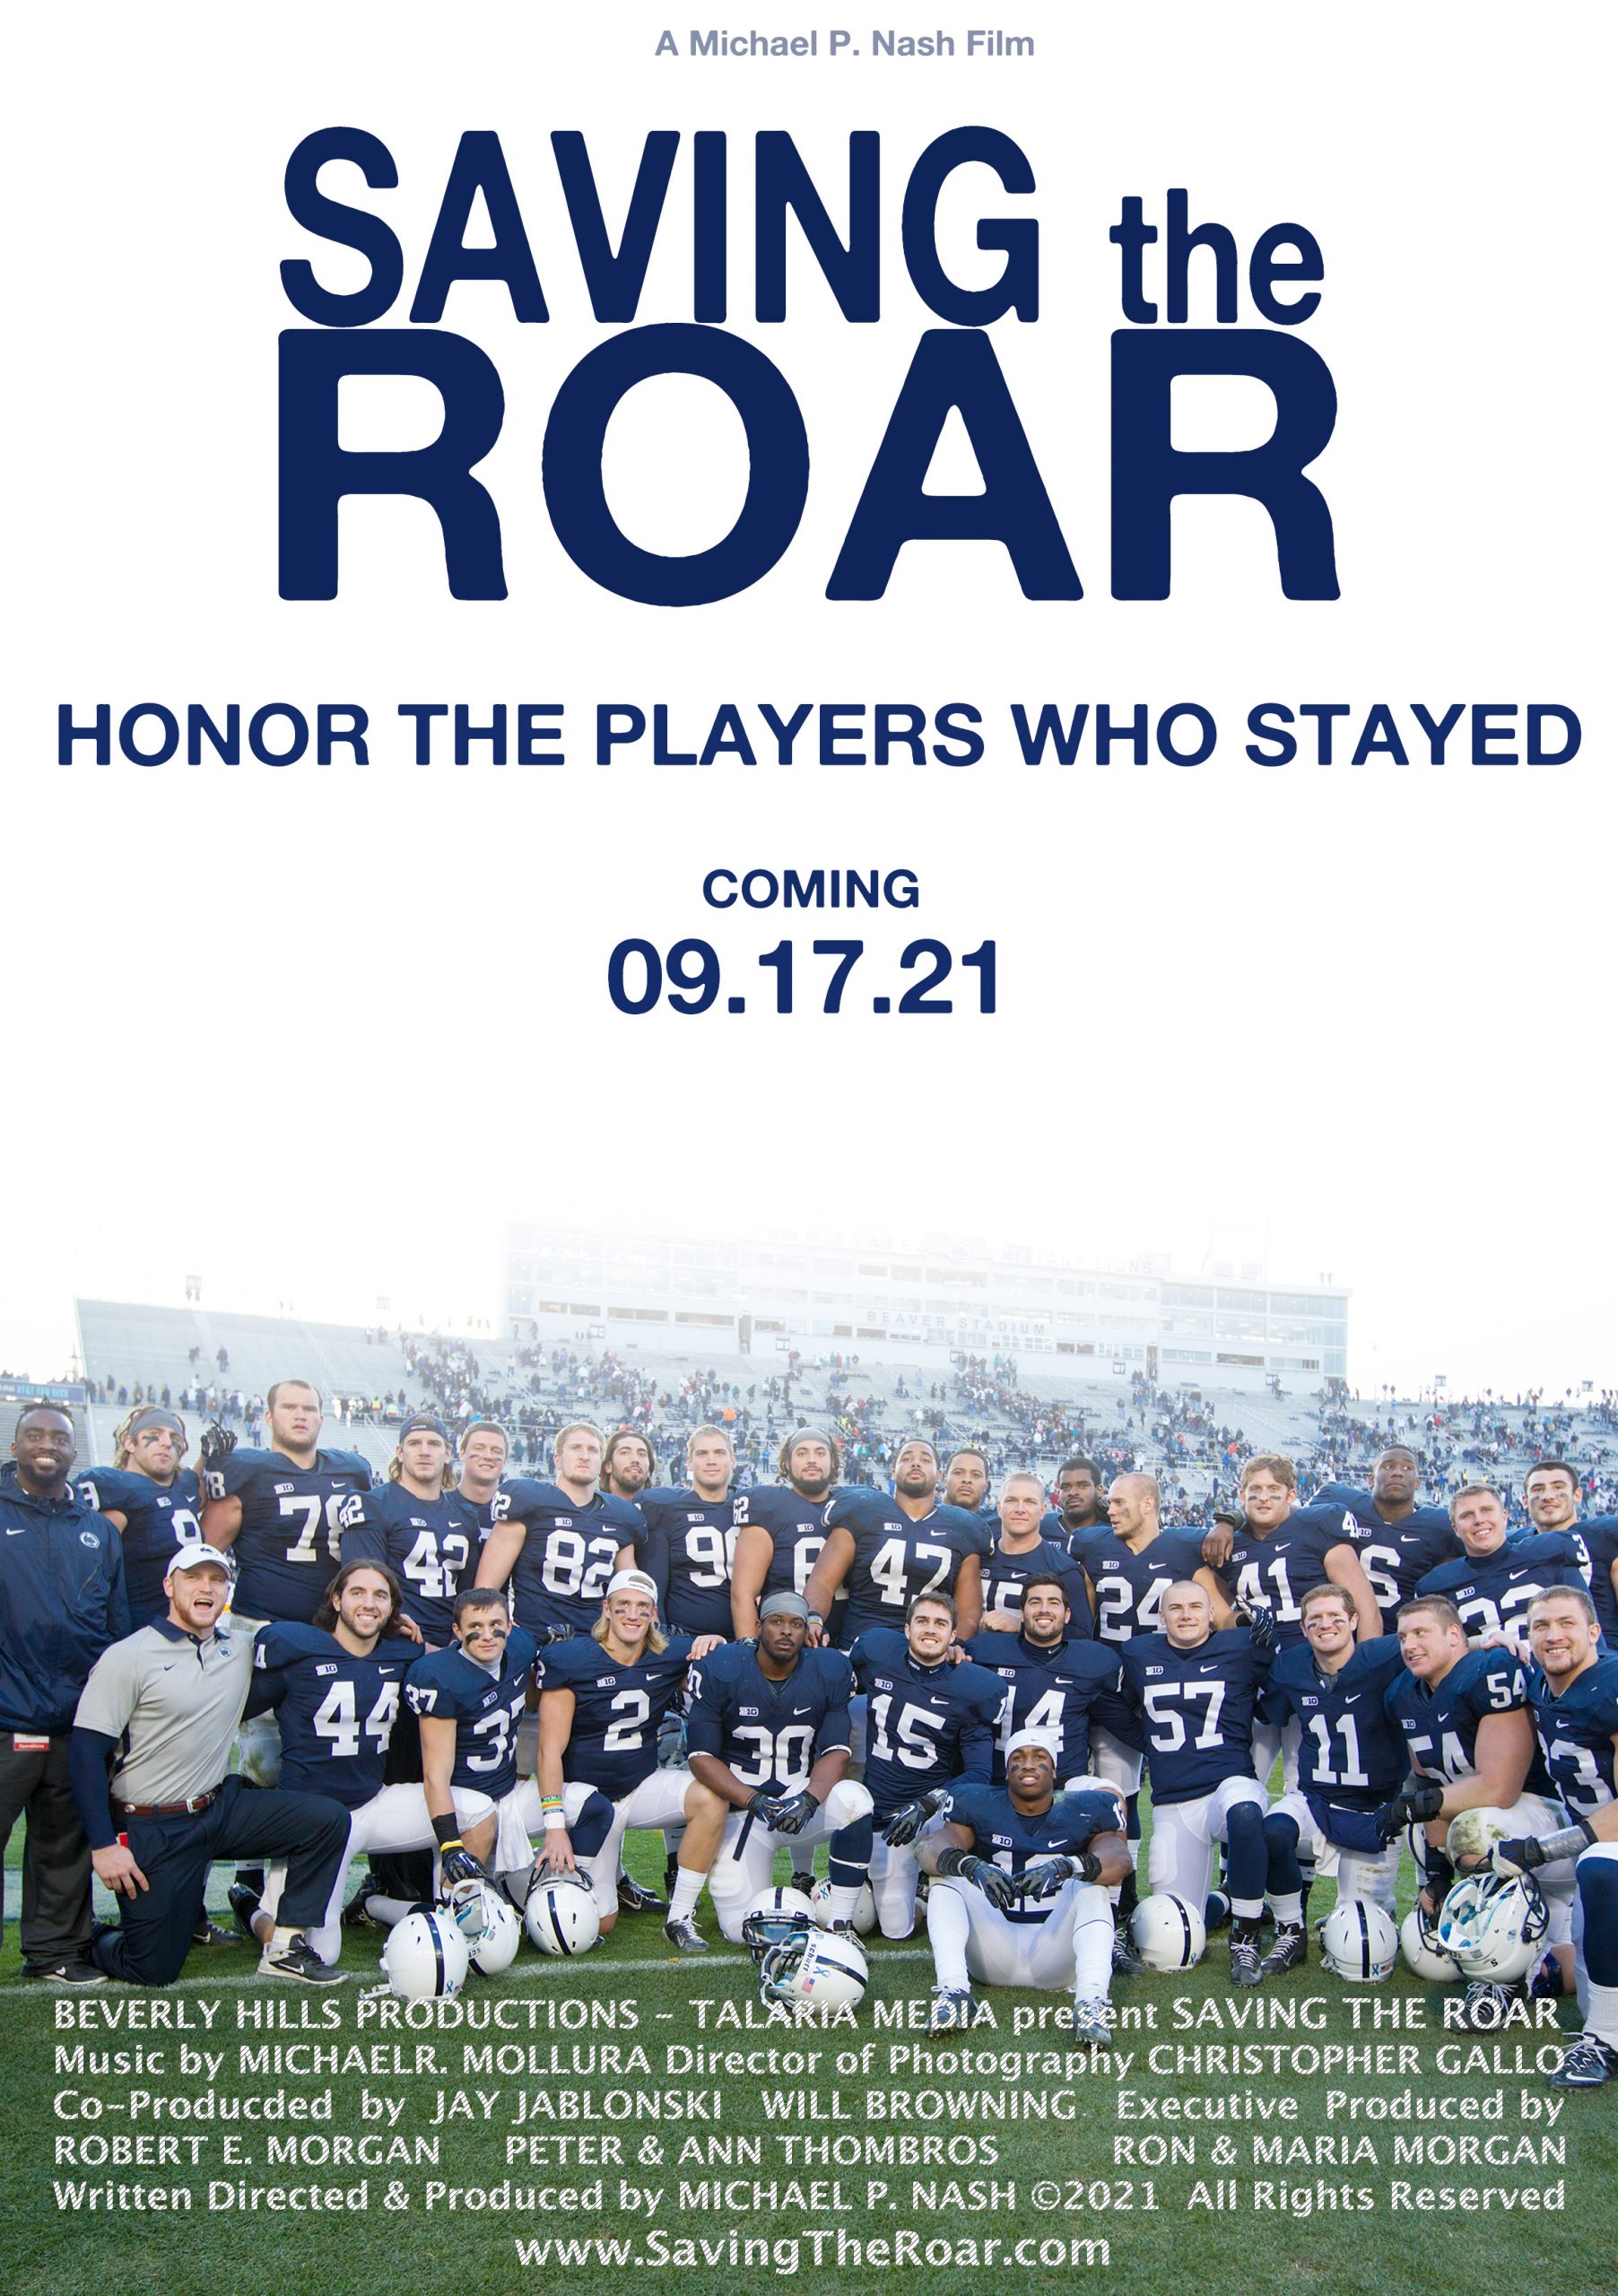 Saving the Roar: Honor the Players who Stayed